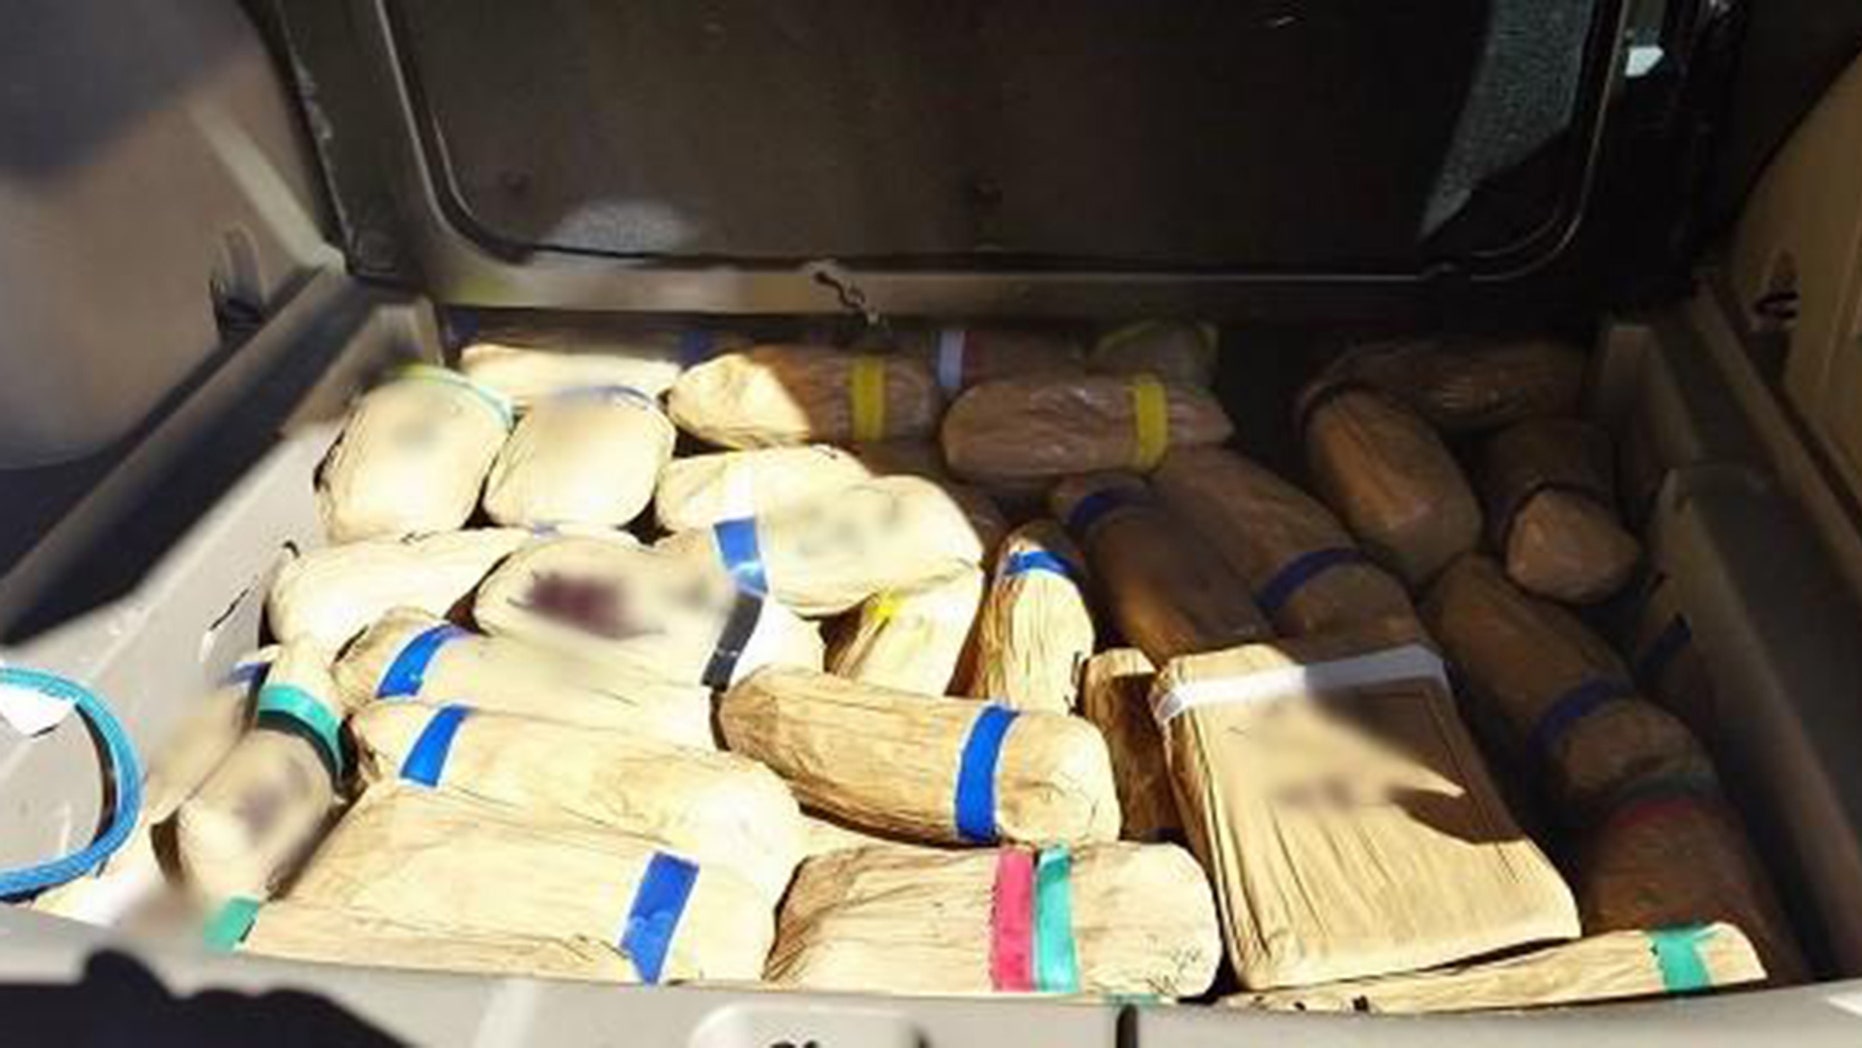 US Customs and Border Protection officers discovered this hard drug van in a Jeep SUV in three separate incidents on the US-Mexico border in Arizona.